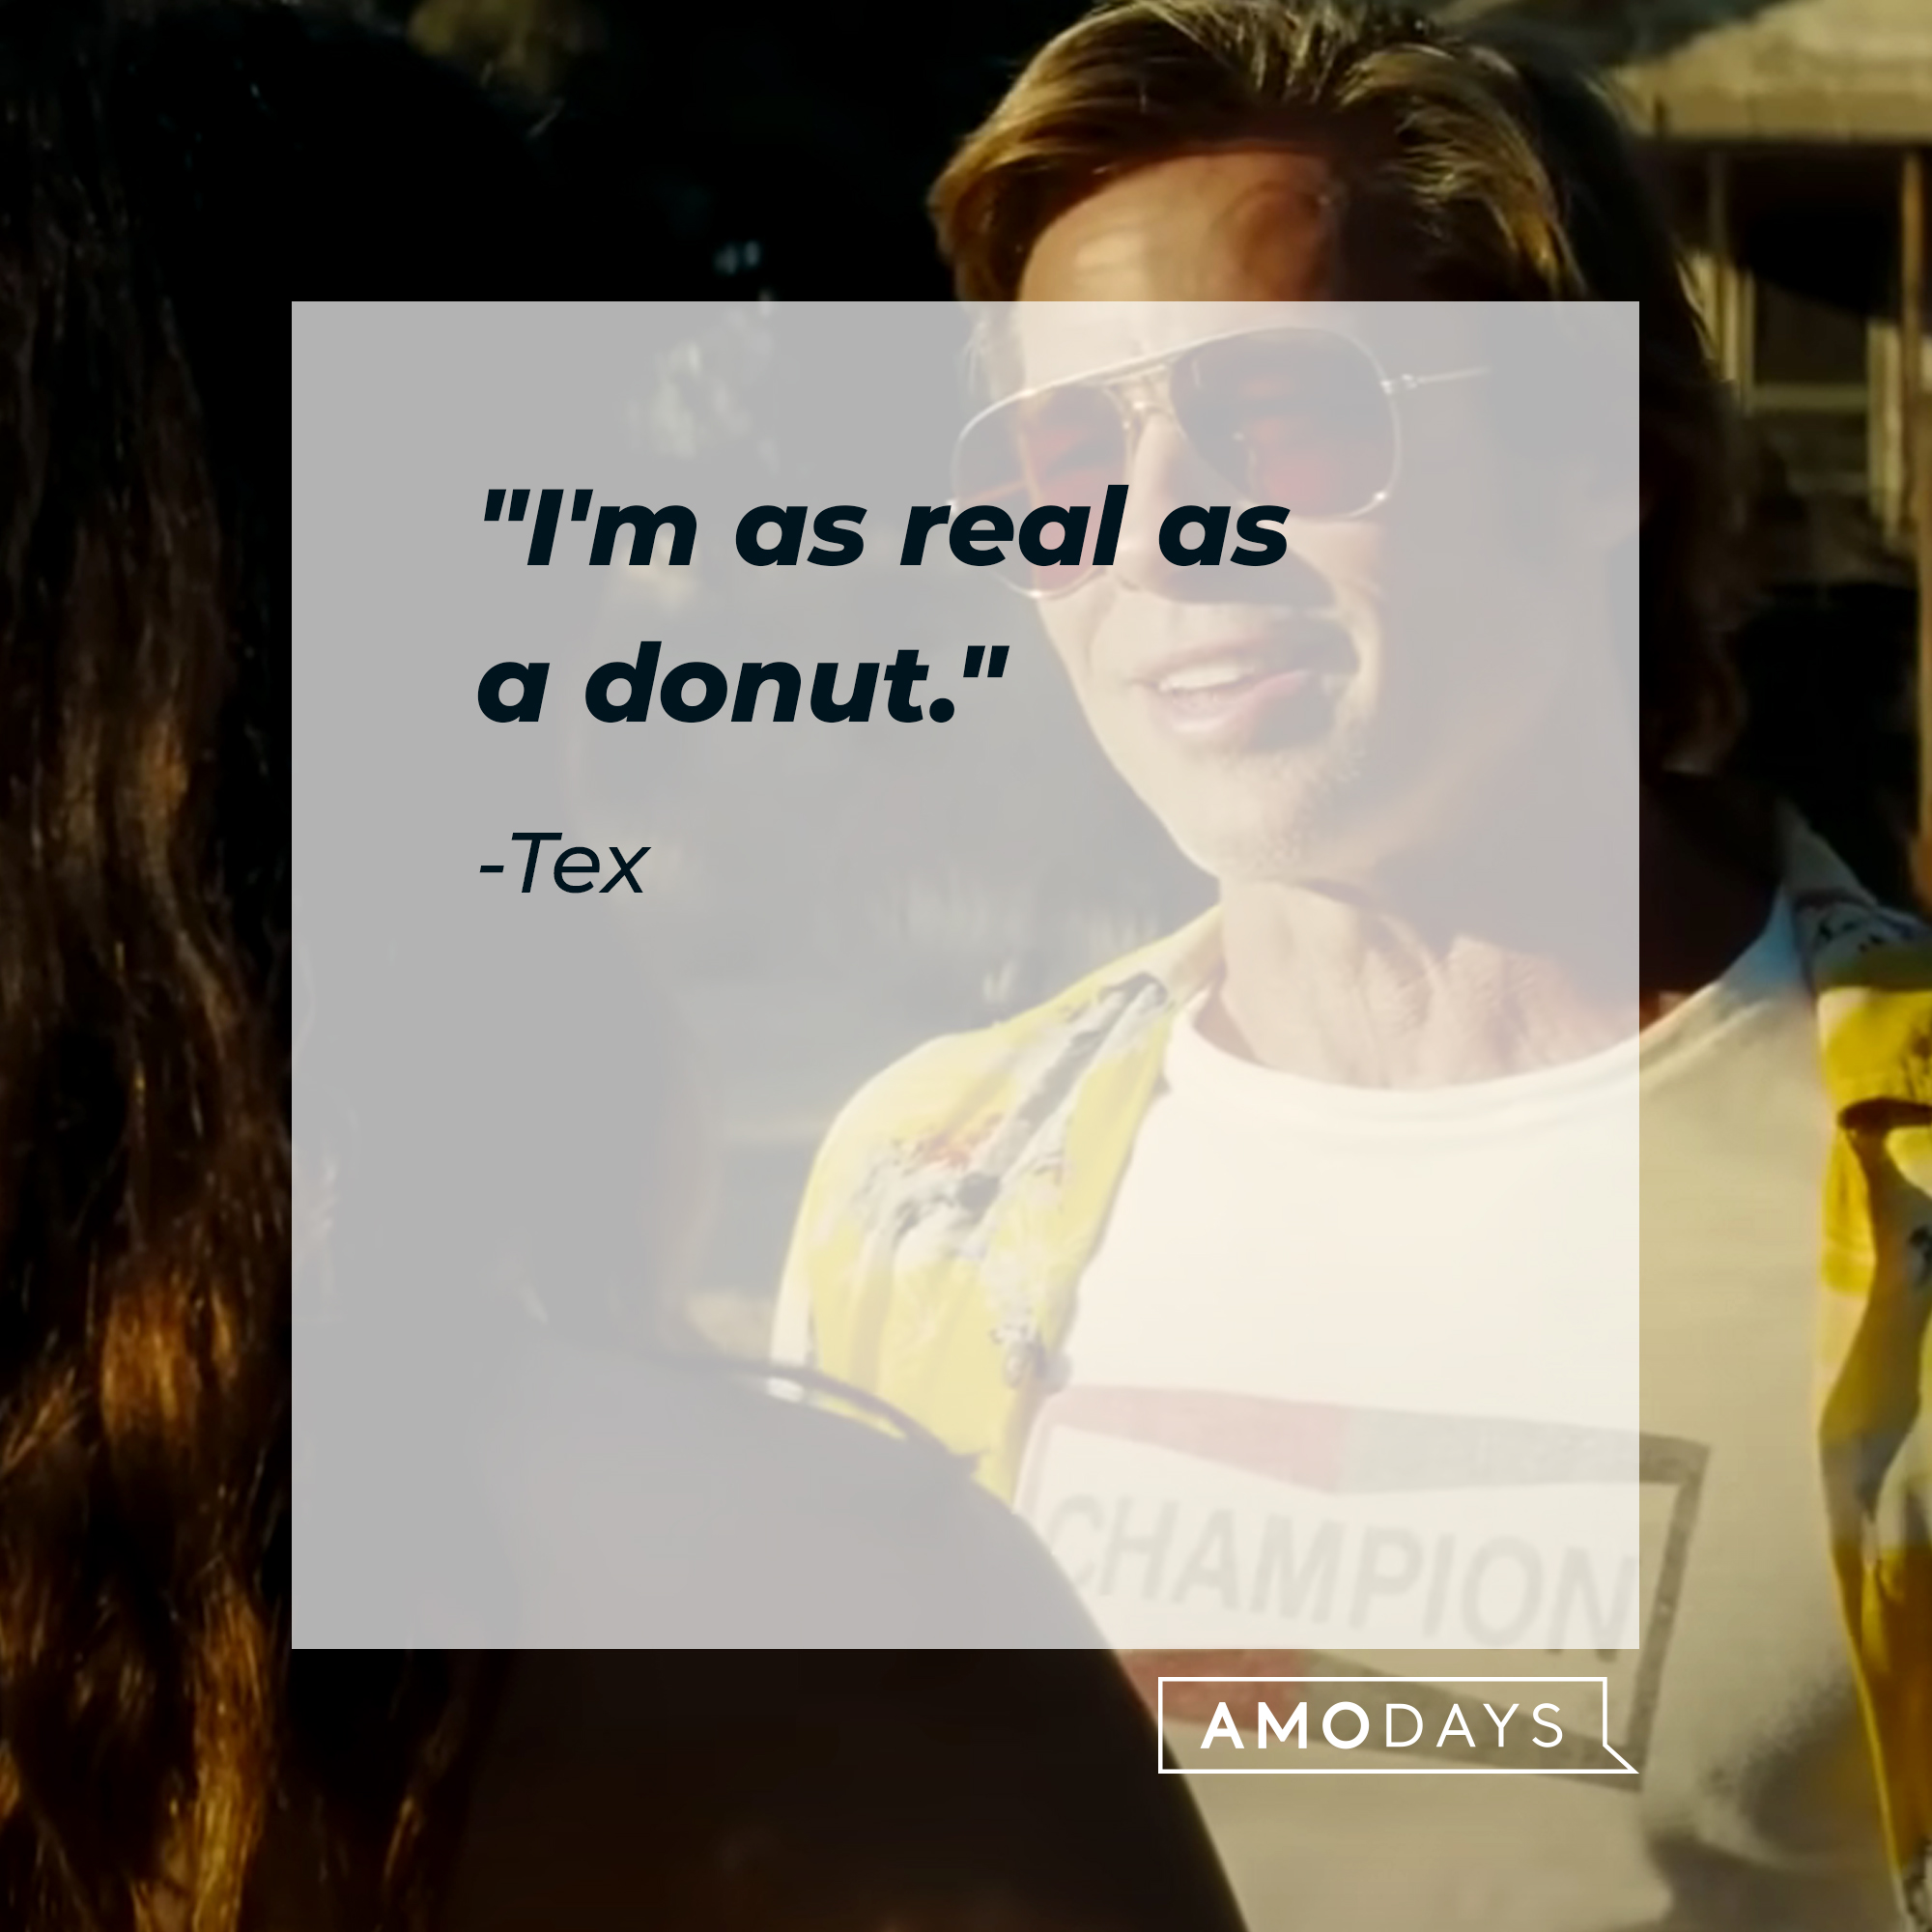 Cliff Booth with the quote, "I'm as real as a donut." | Source: Facebook/OnceInHollywood